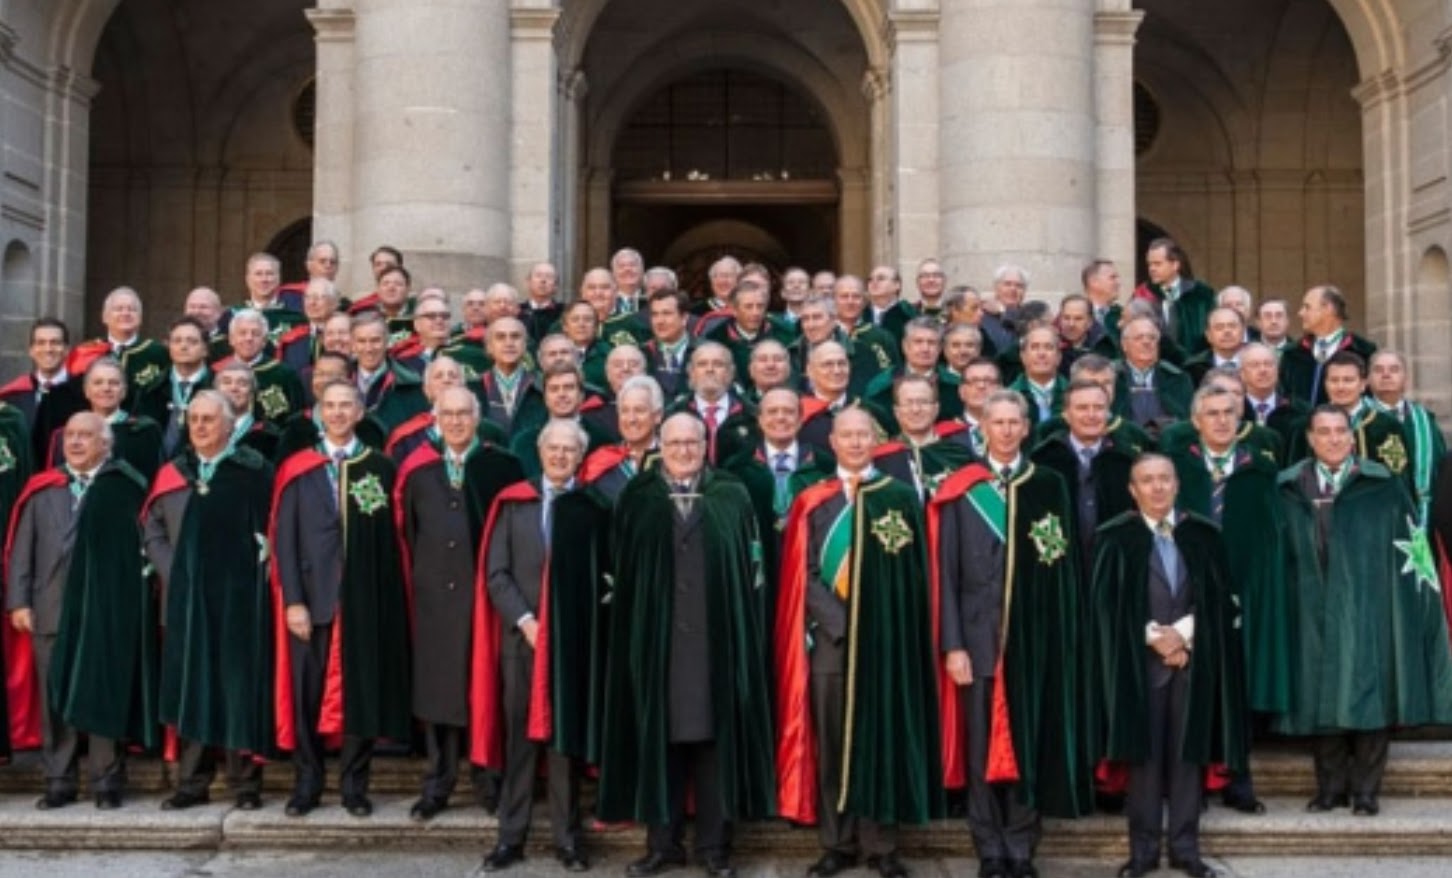 Photo of The Order of St Hubertus which some consider the ‘Illuminati of the hunting world’ 